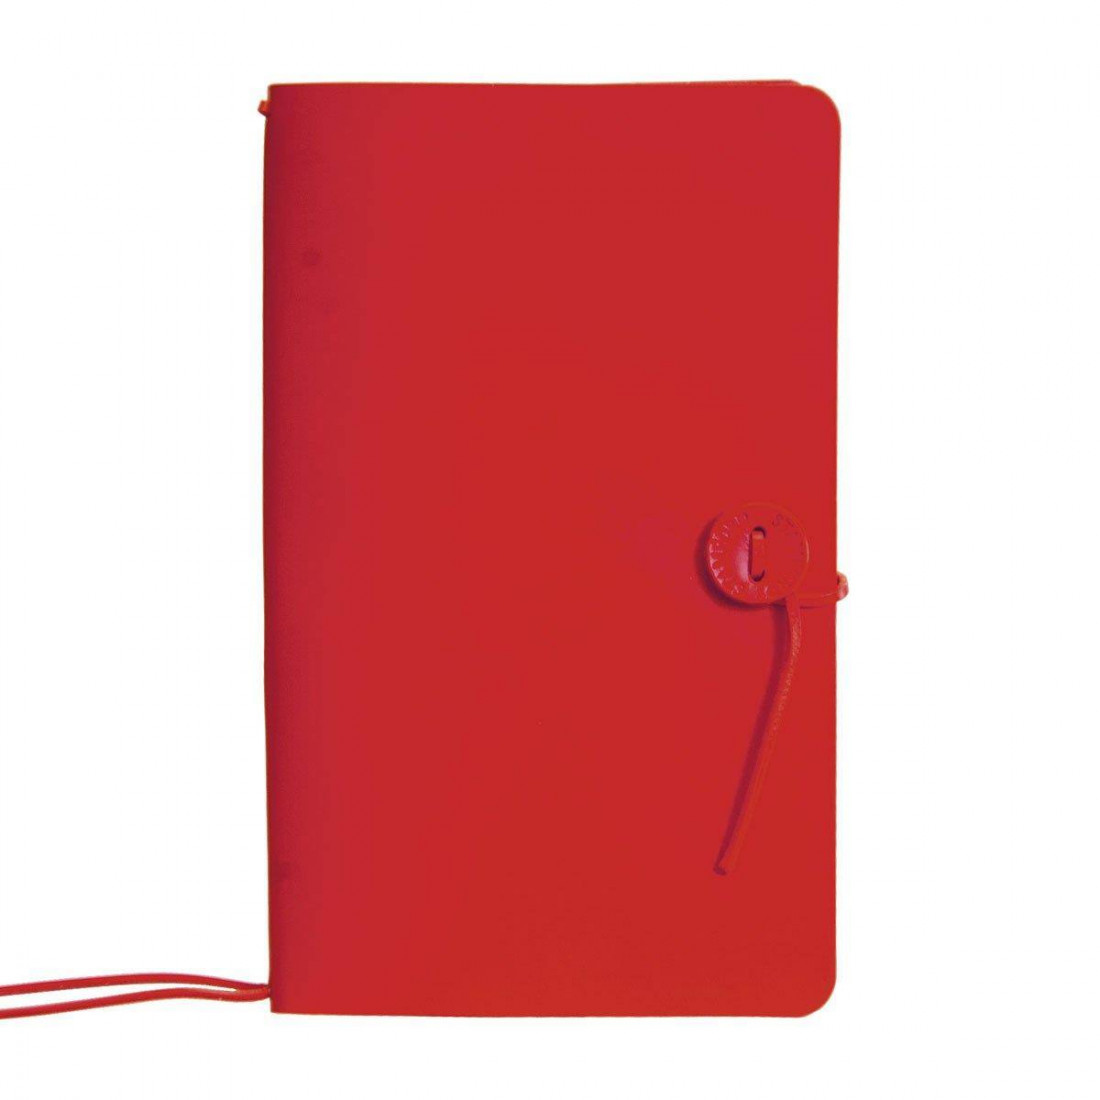 The Travellers Journal Bright Range, Red, Large (18x25.5) Stamford